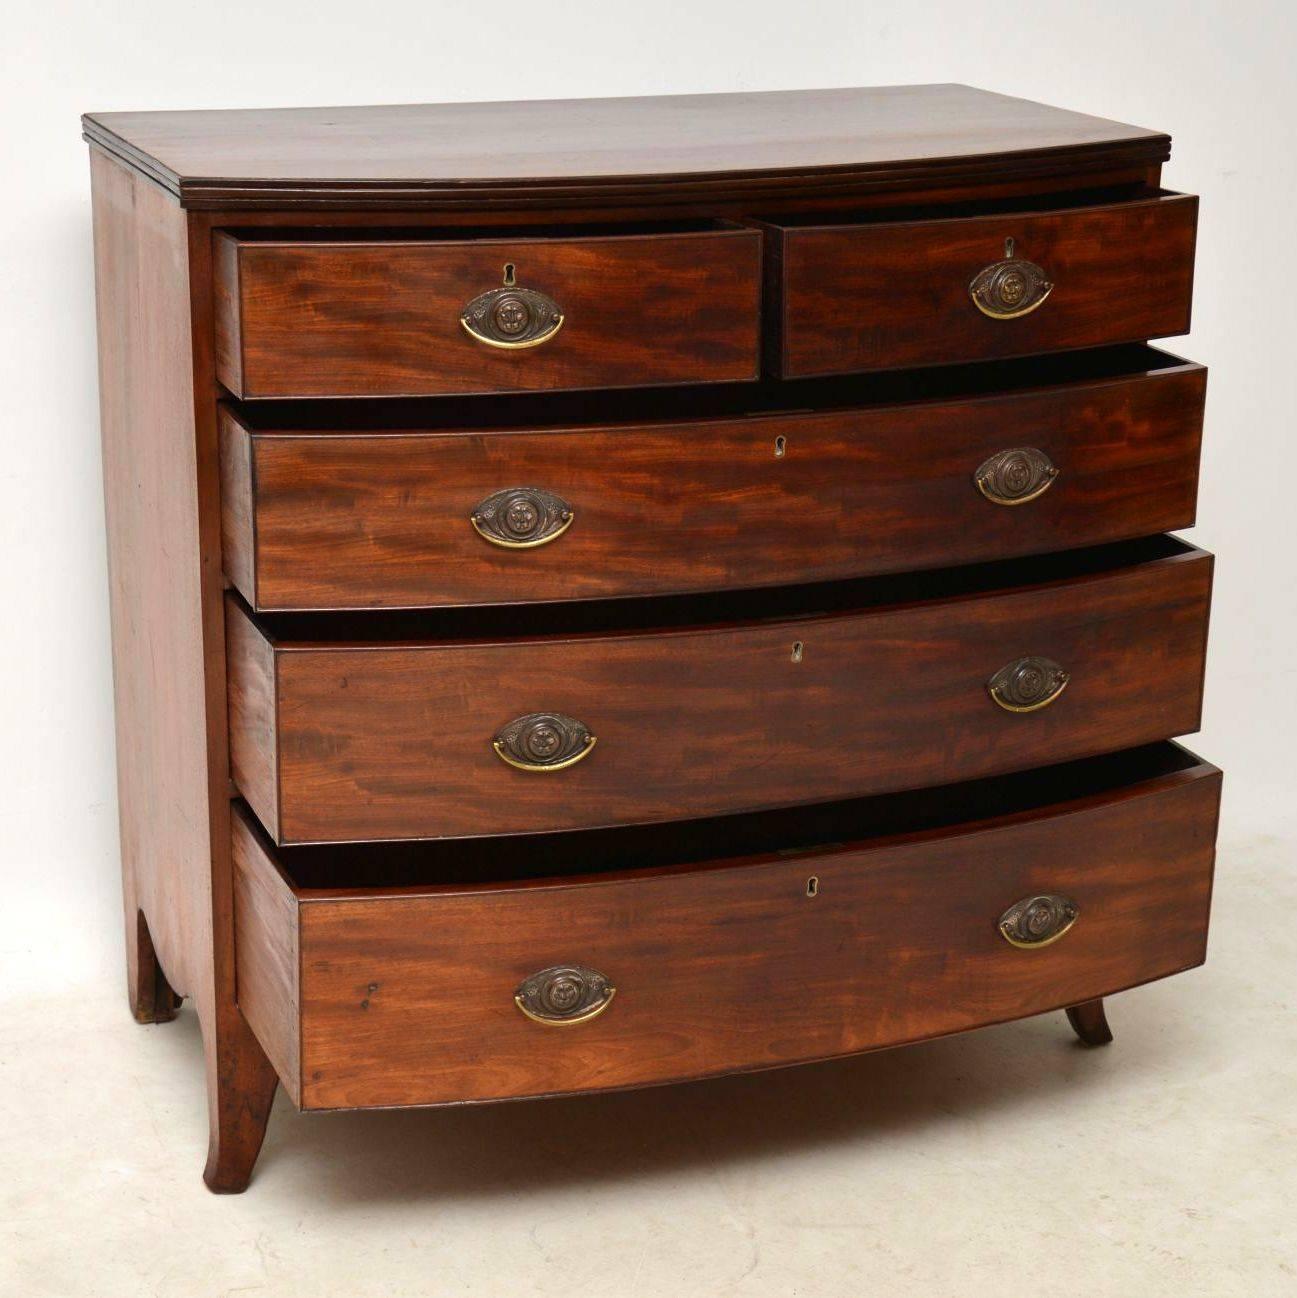 George III Antique Georgian III Mahogany Bow Fronted Chest of Drawers